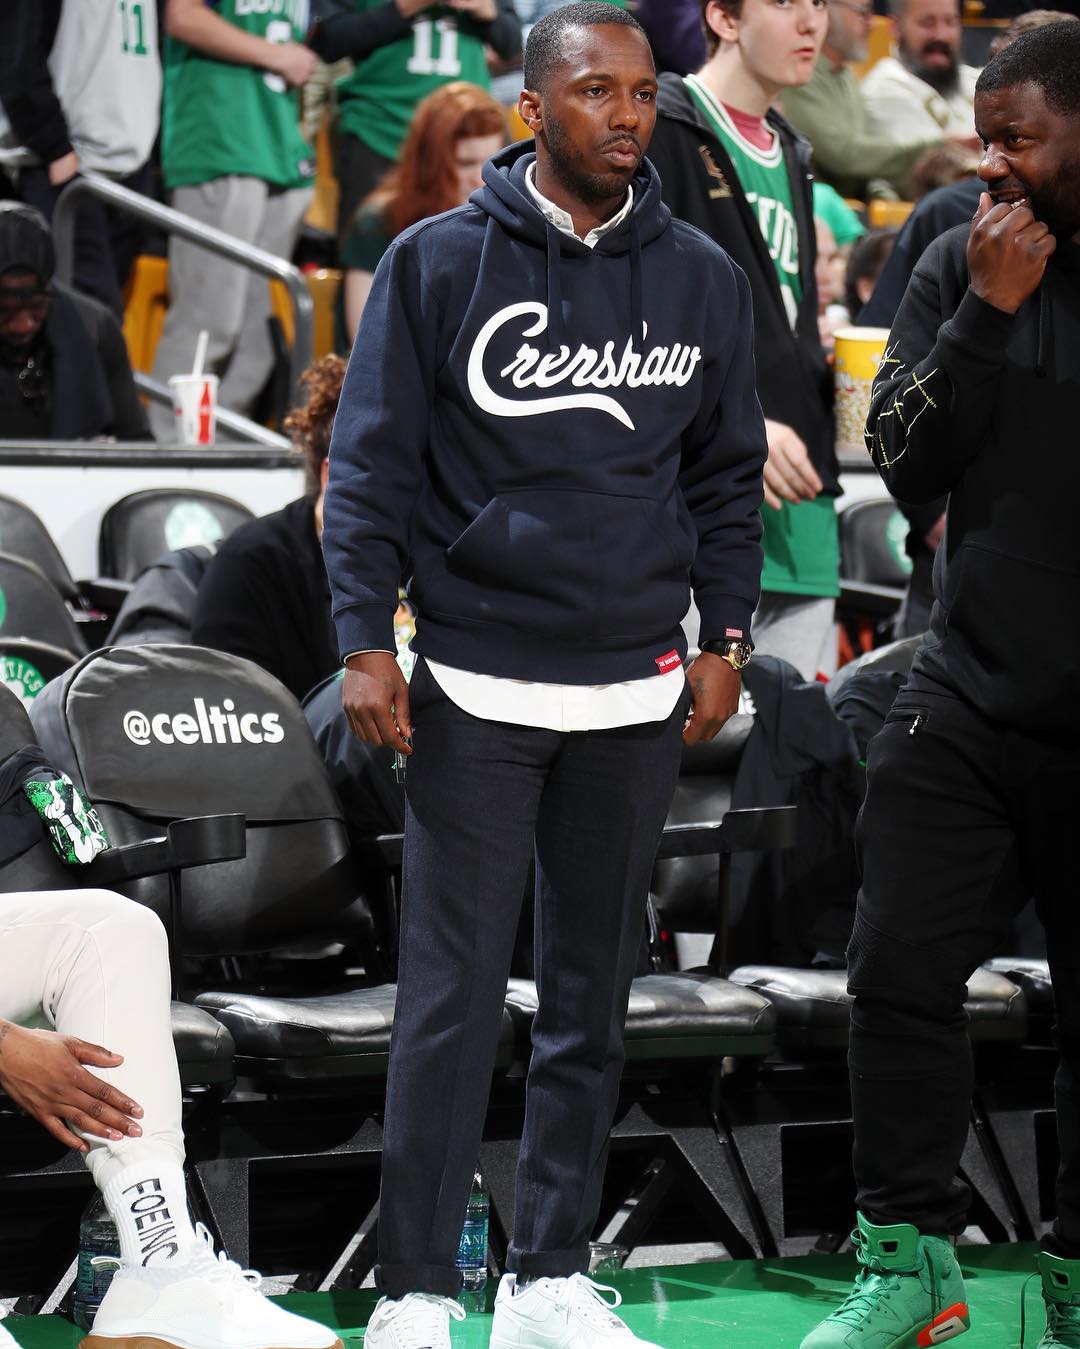 Rich Paul At The Sidelines Of His Client's Game